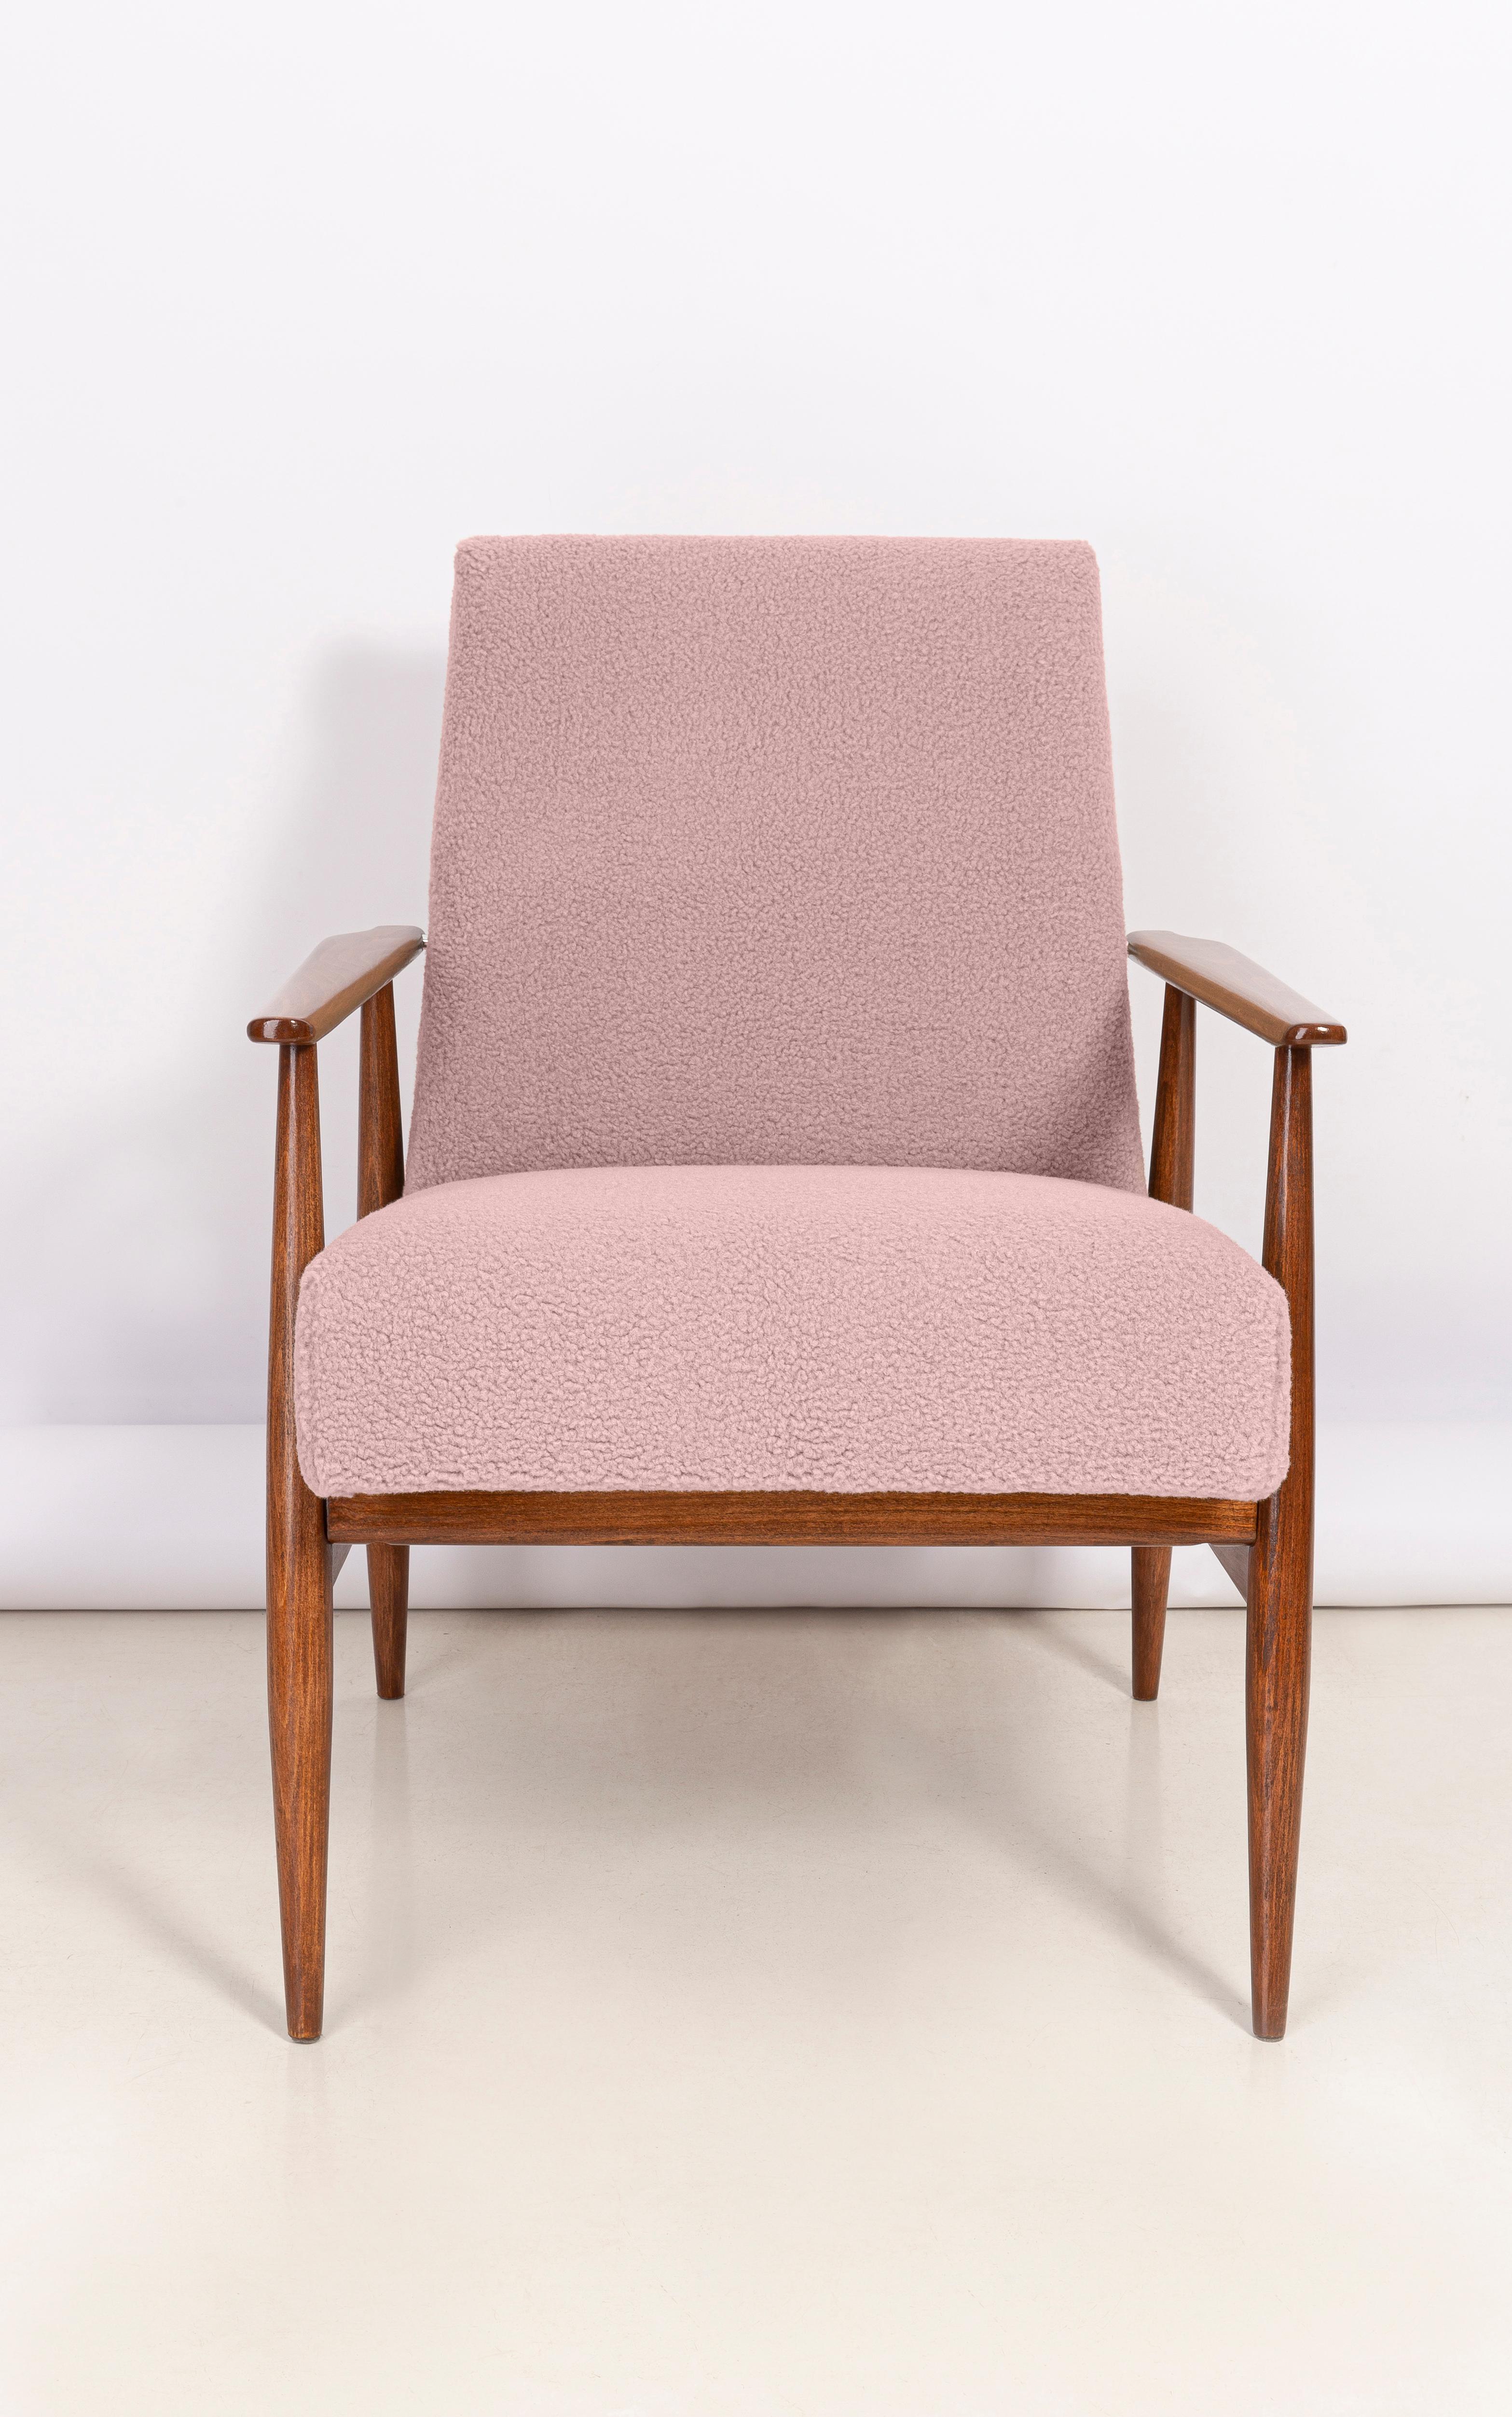 Hand-Crafted Pair of Dusty Pink Bouclé Dante Armchairs, H. Lis, Europe, 1960s For Sale